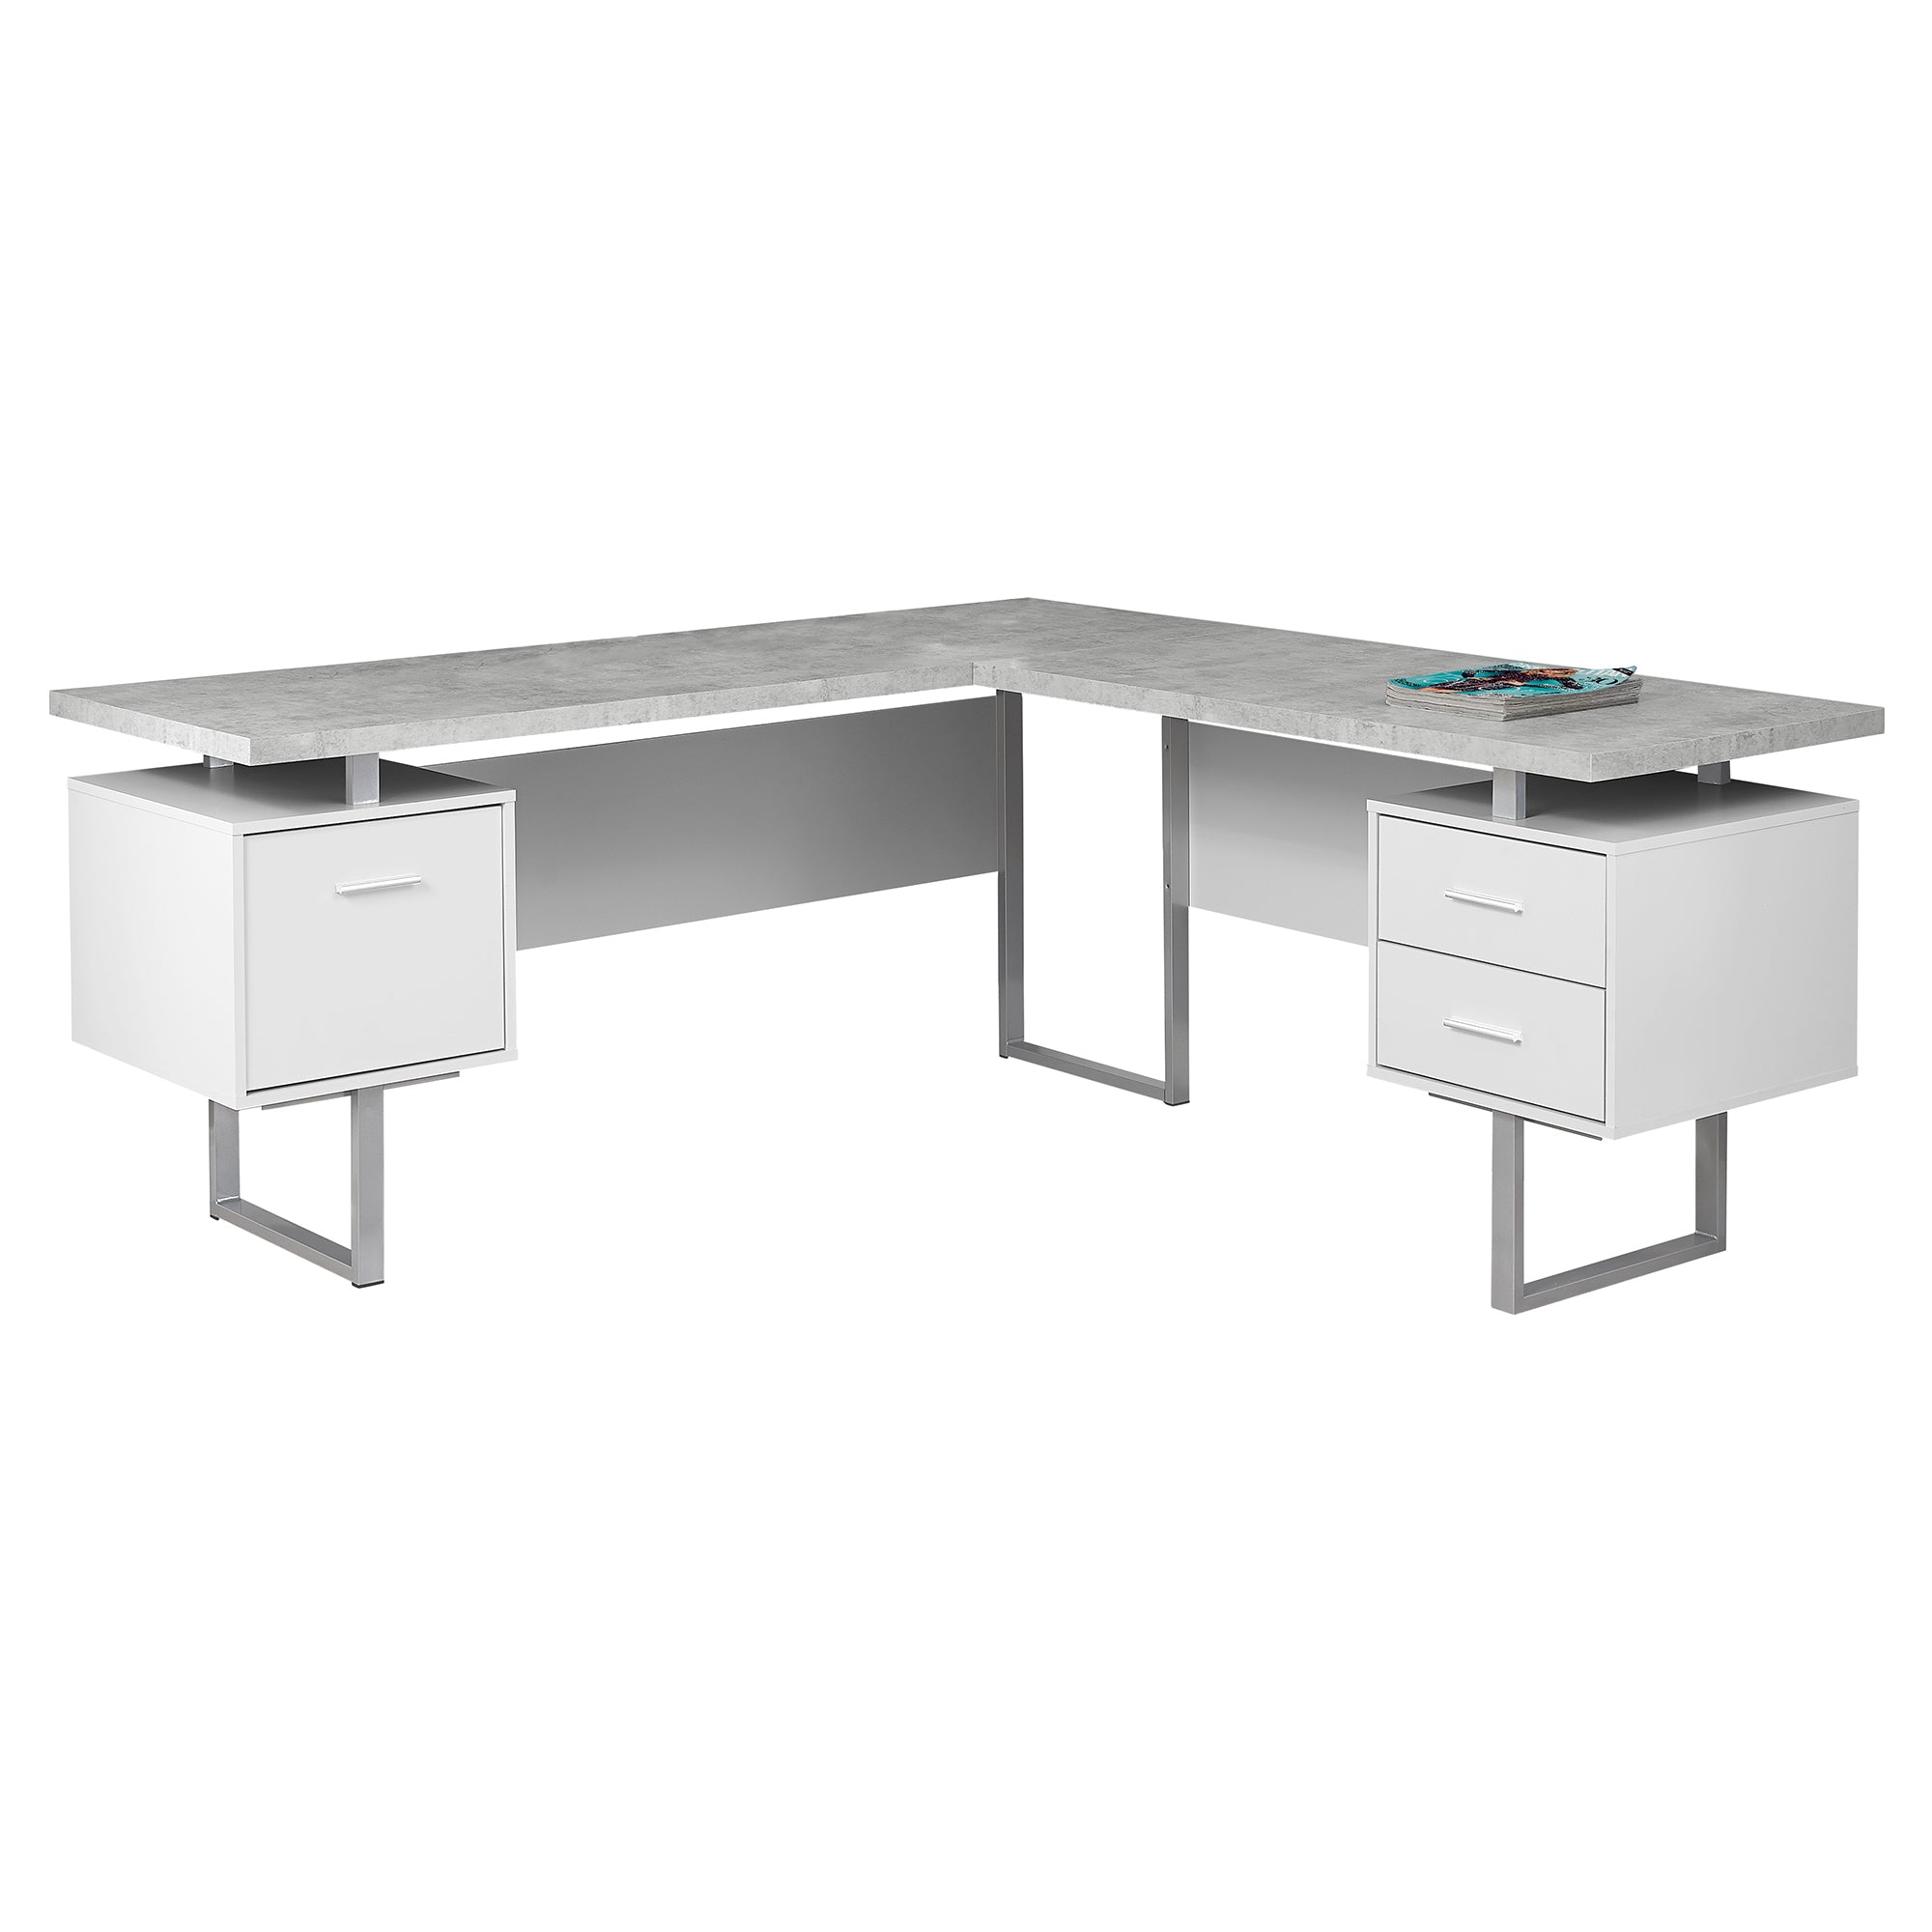 MN-107307    Computer Desk, Home Office, Corner, Left, Right Set-Up, Storage Drawers, 70"L, L Shape, Metal, Laminate, Grey Cement Look, Grey, Contemporary, Modern